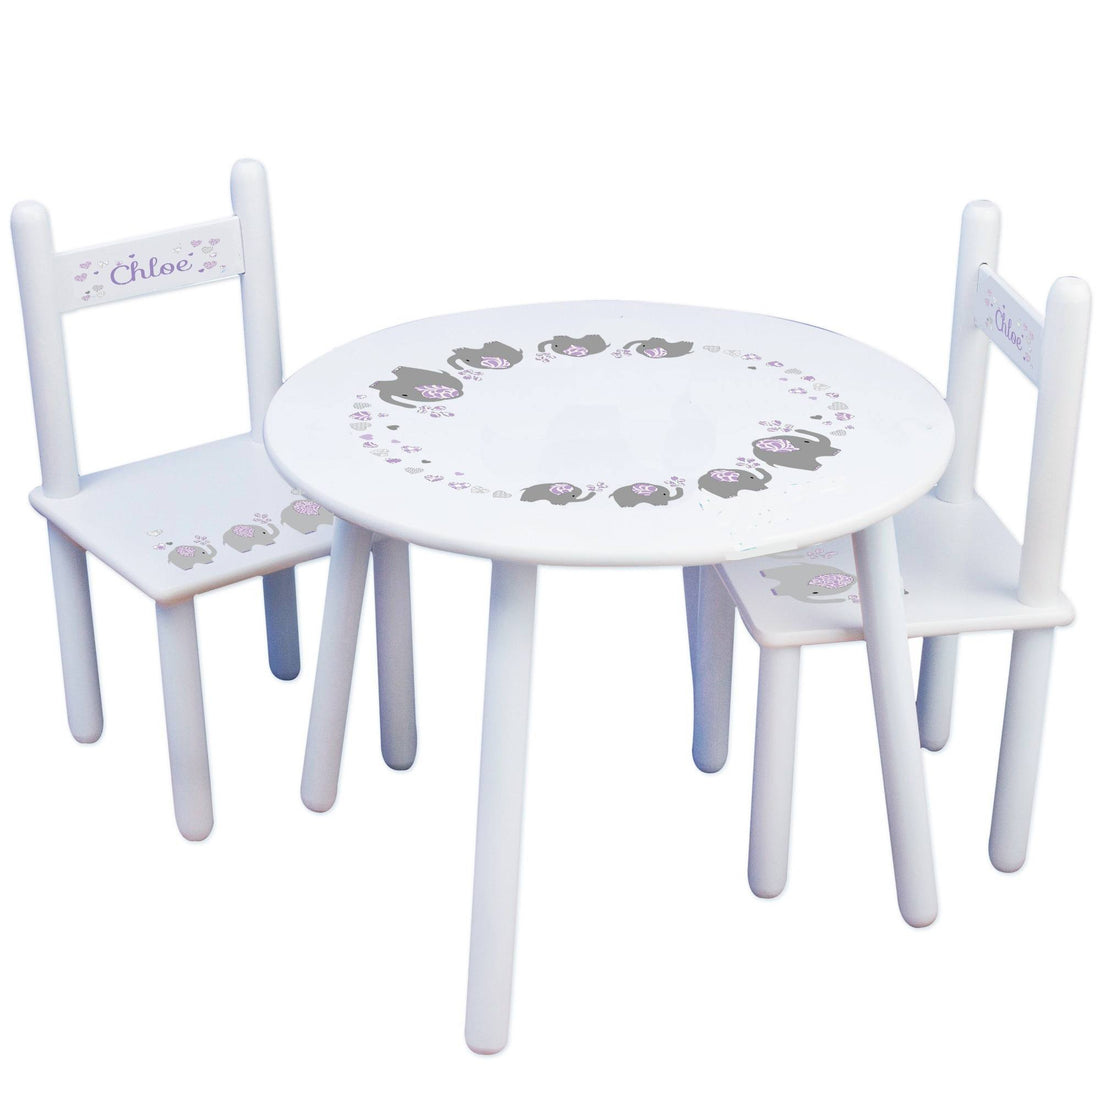 Personalized Table and Chairs with Lavender Elephant design